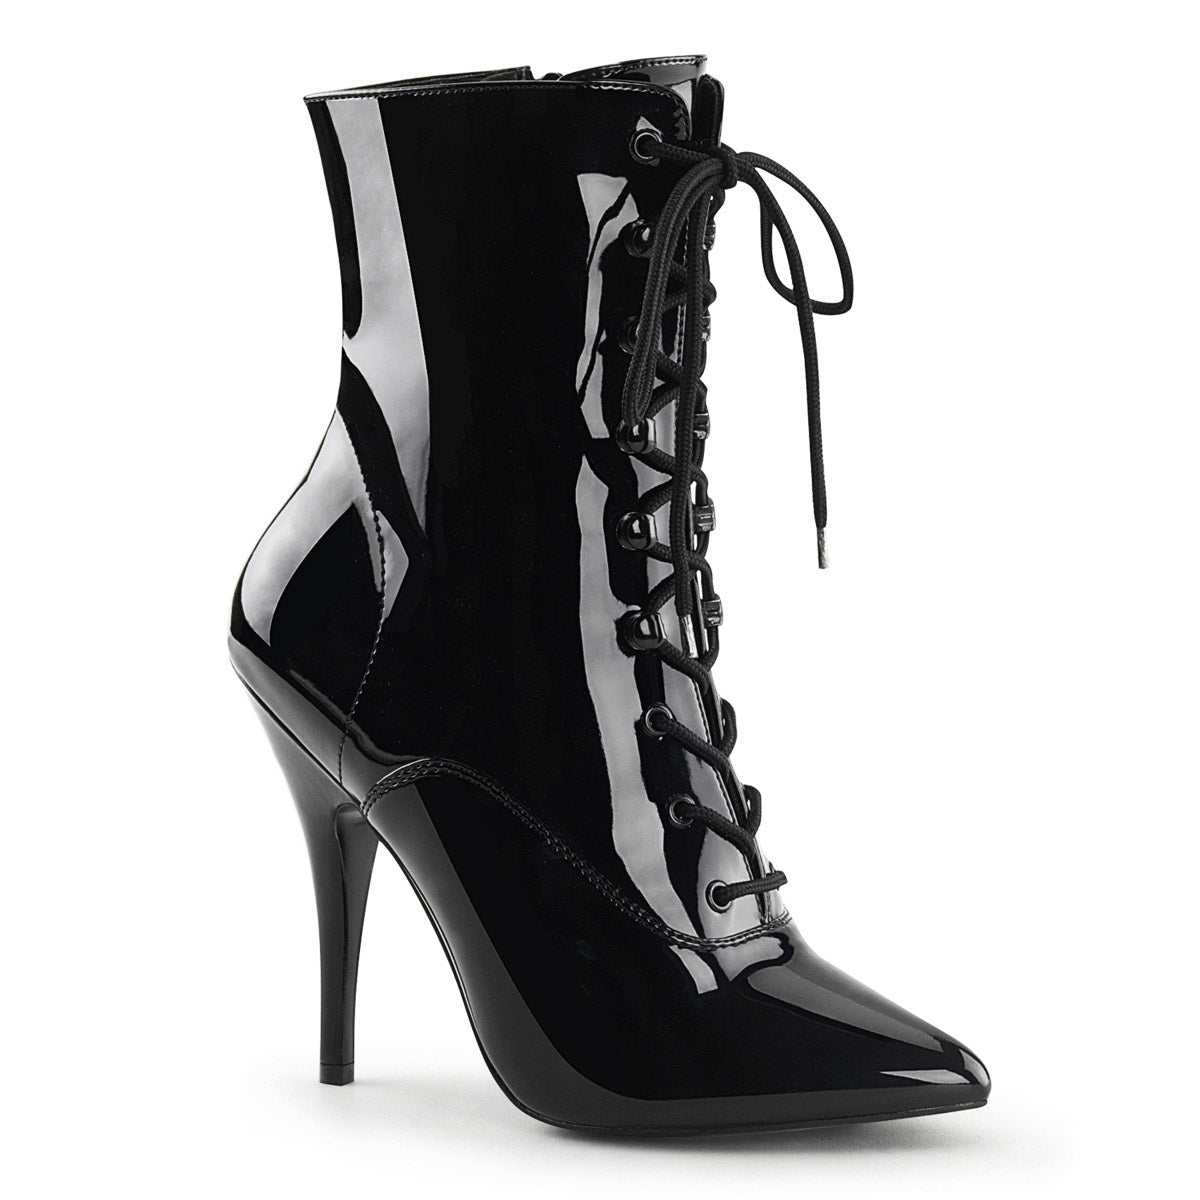 Sexy Pointy Toe Lace Up Ankle Bootie Stiletto High Heel Boots Shoes Pleaser Pleaser SEDUCE/1020